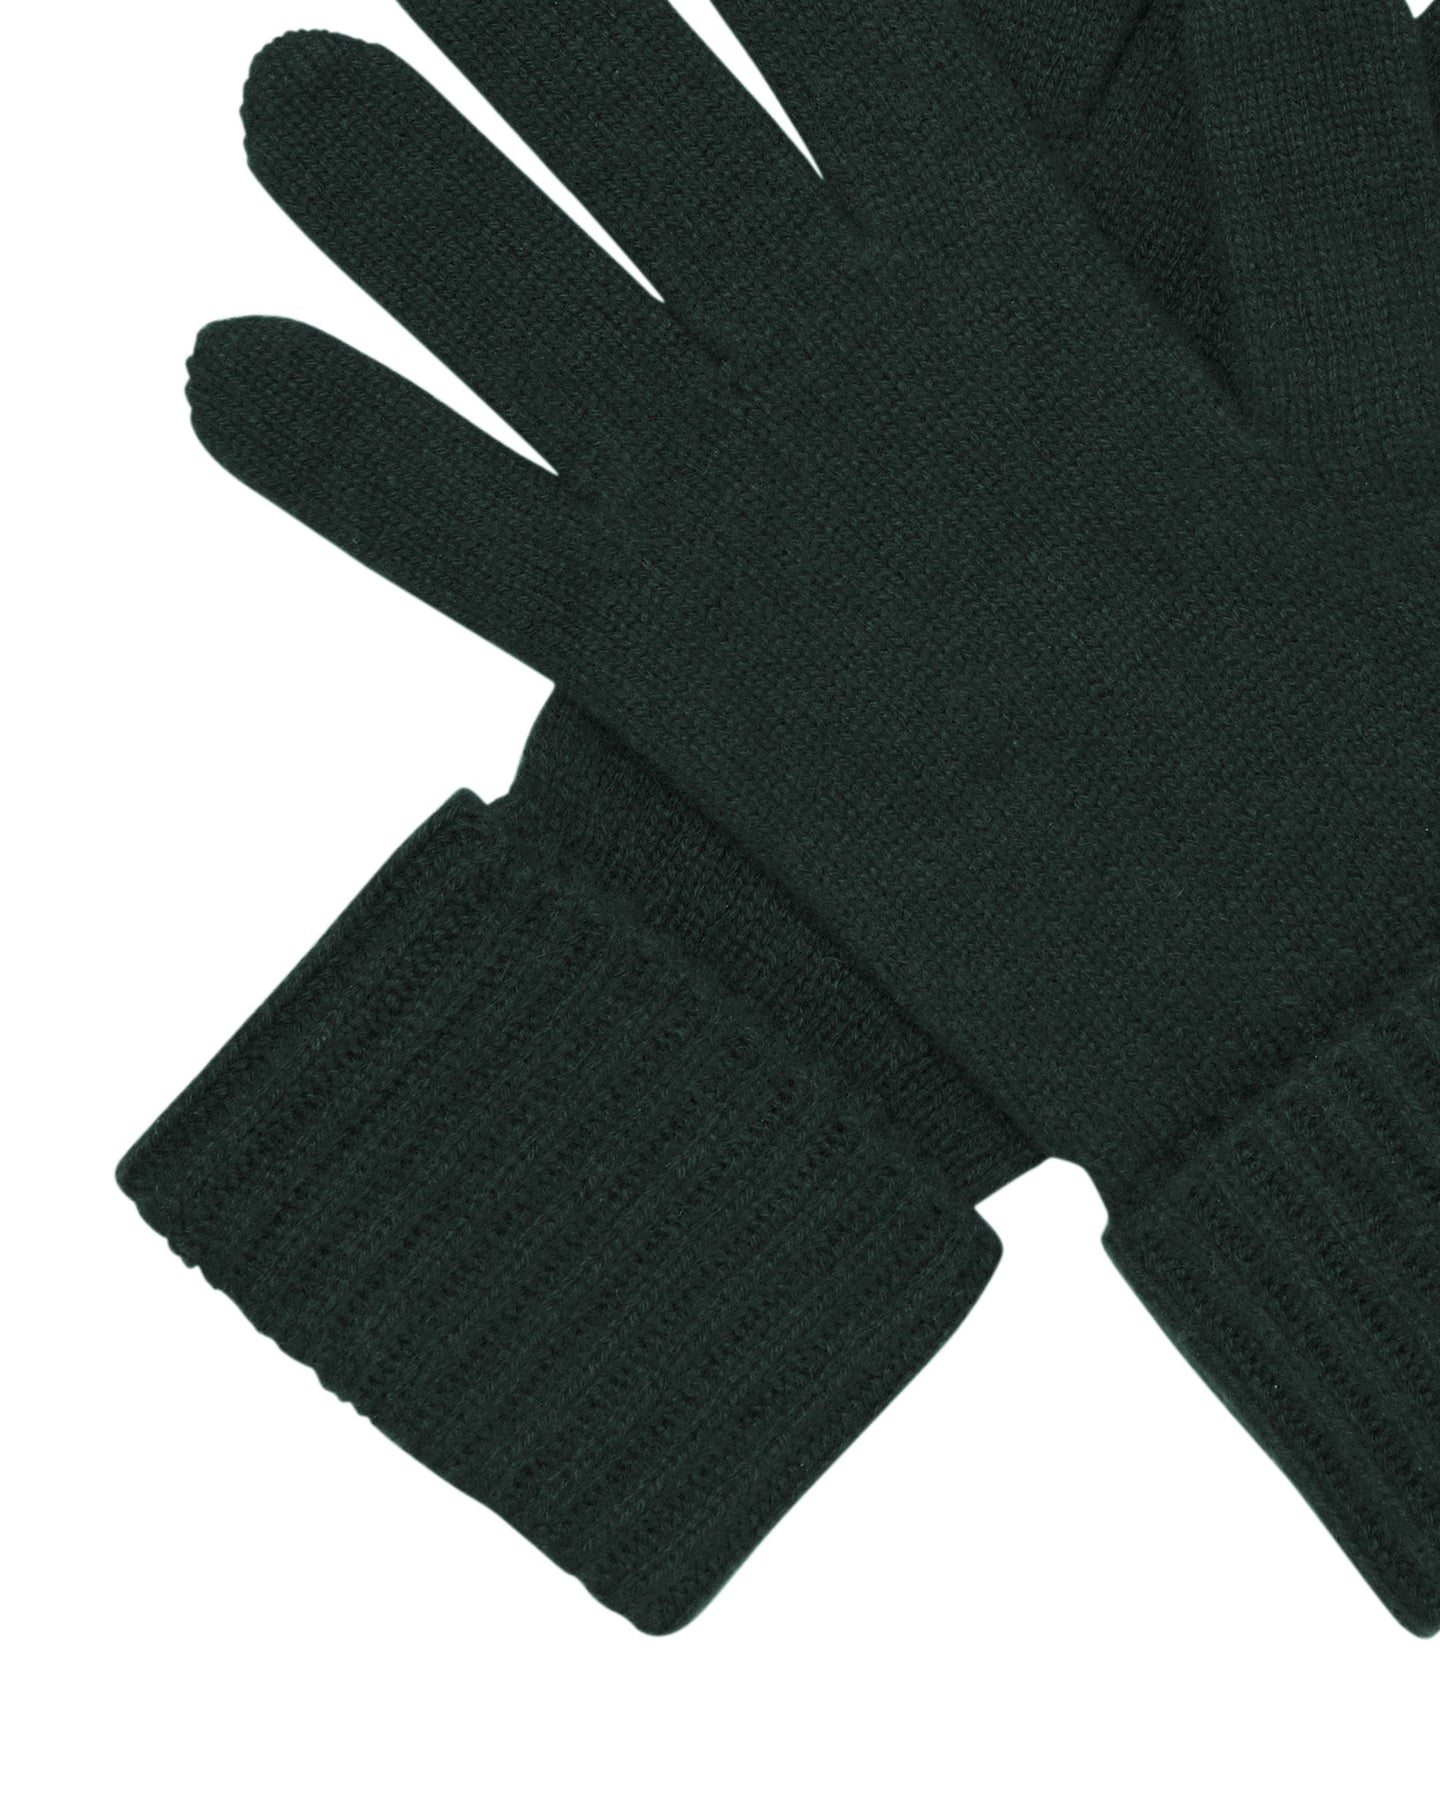 N.Peal Women's Ribbed Cashmere Gloves Dark Green